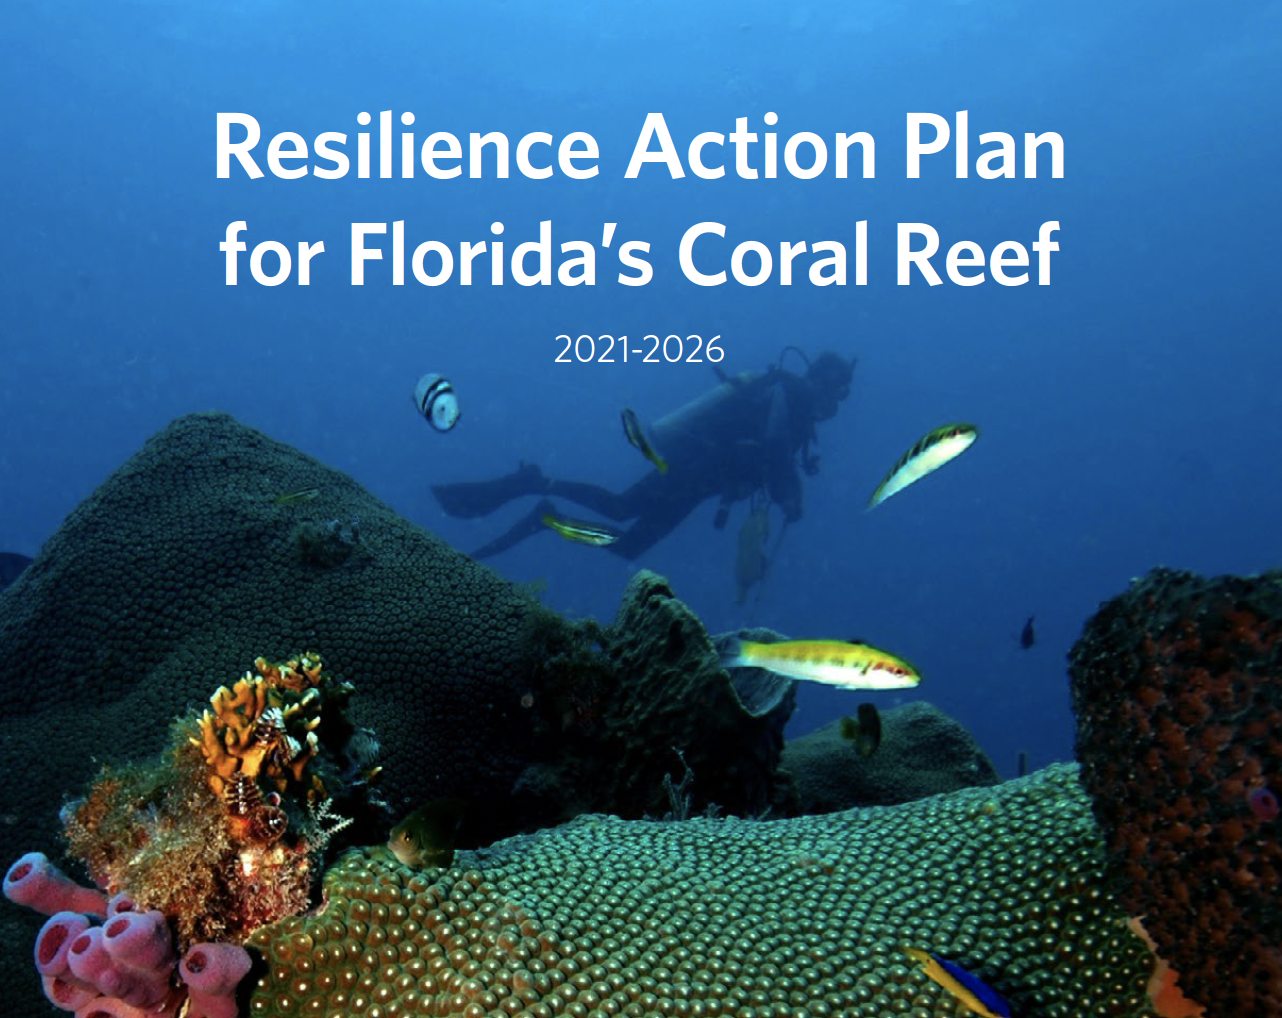 Resilience Action Plan for Florida’s Coral Reef.